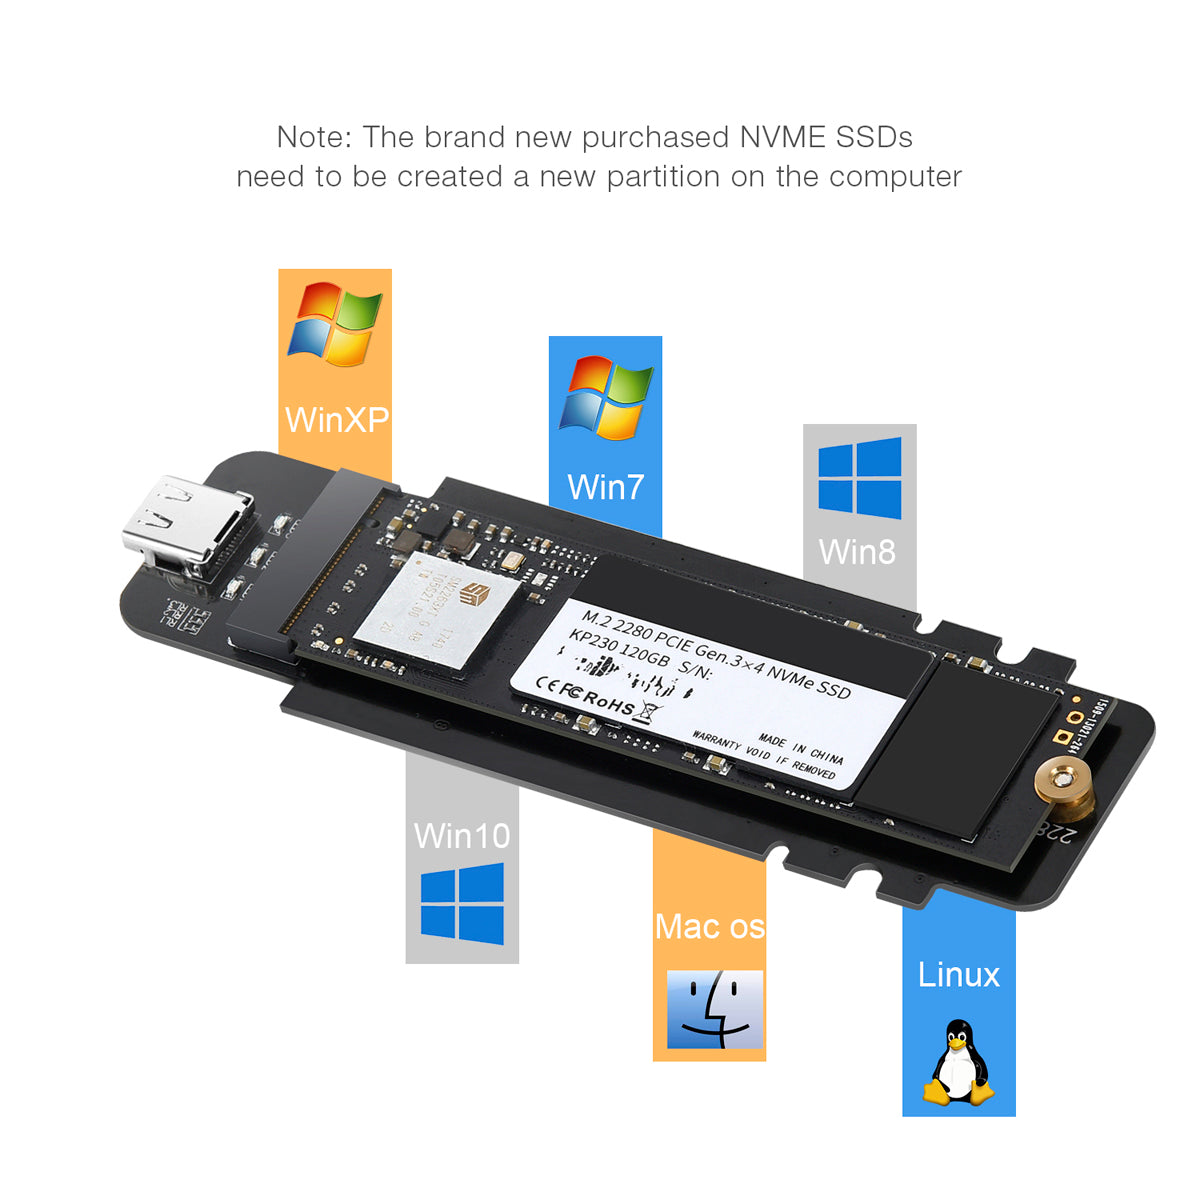 PC-HDE02 M.2 to USB SSD Reader Supports M-Key (PCI-E NVMe-based)